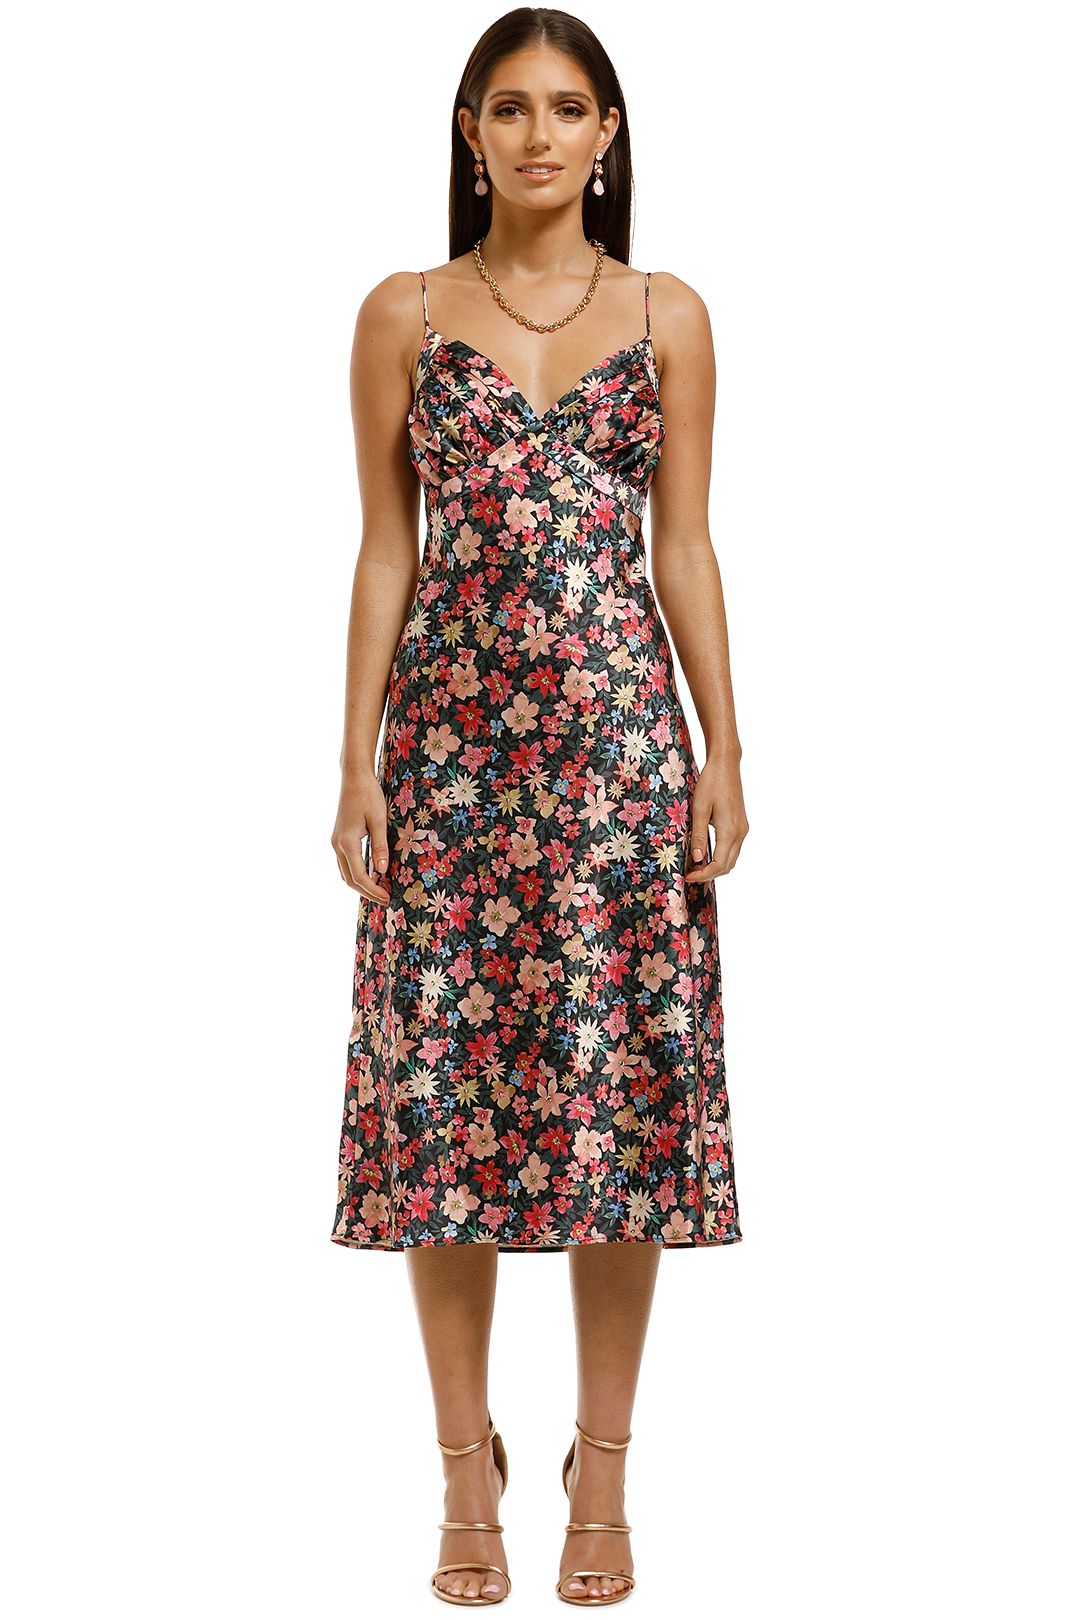 CMEO-Collective-Time-Flew-SS-Dress-Black-Garden-Floral-Front